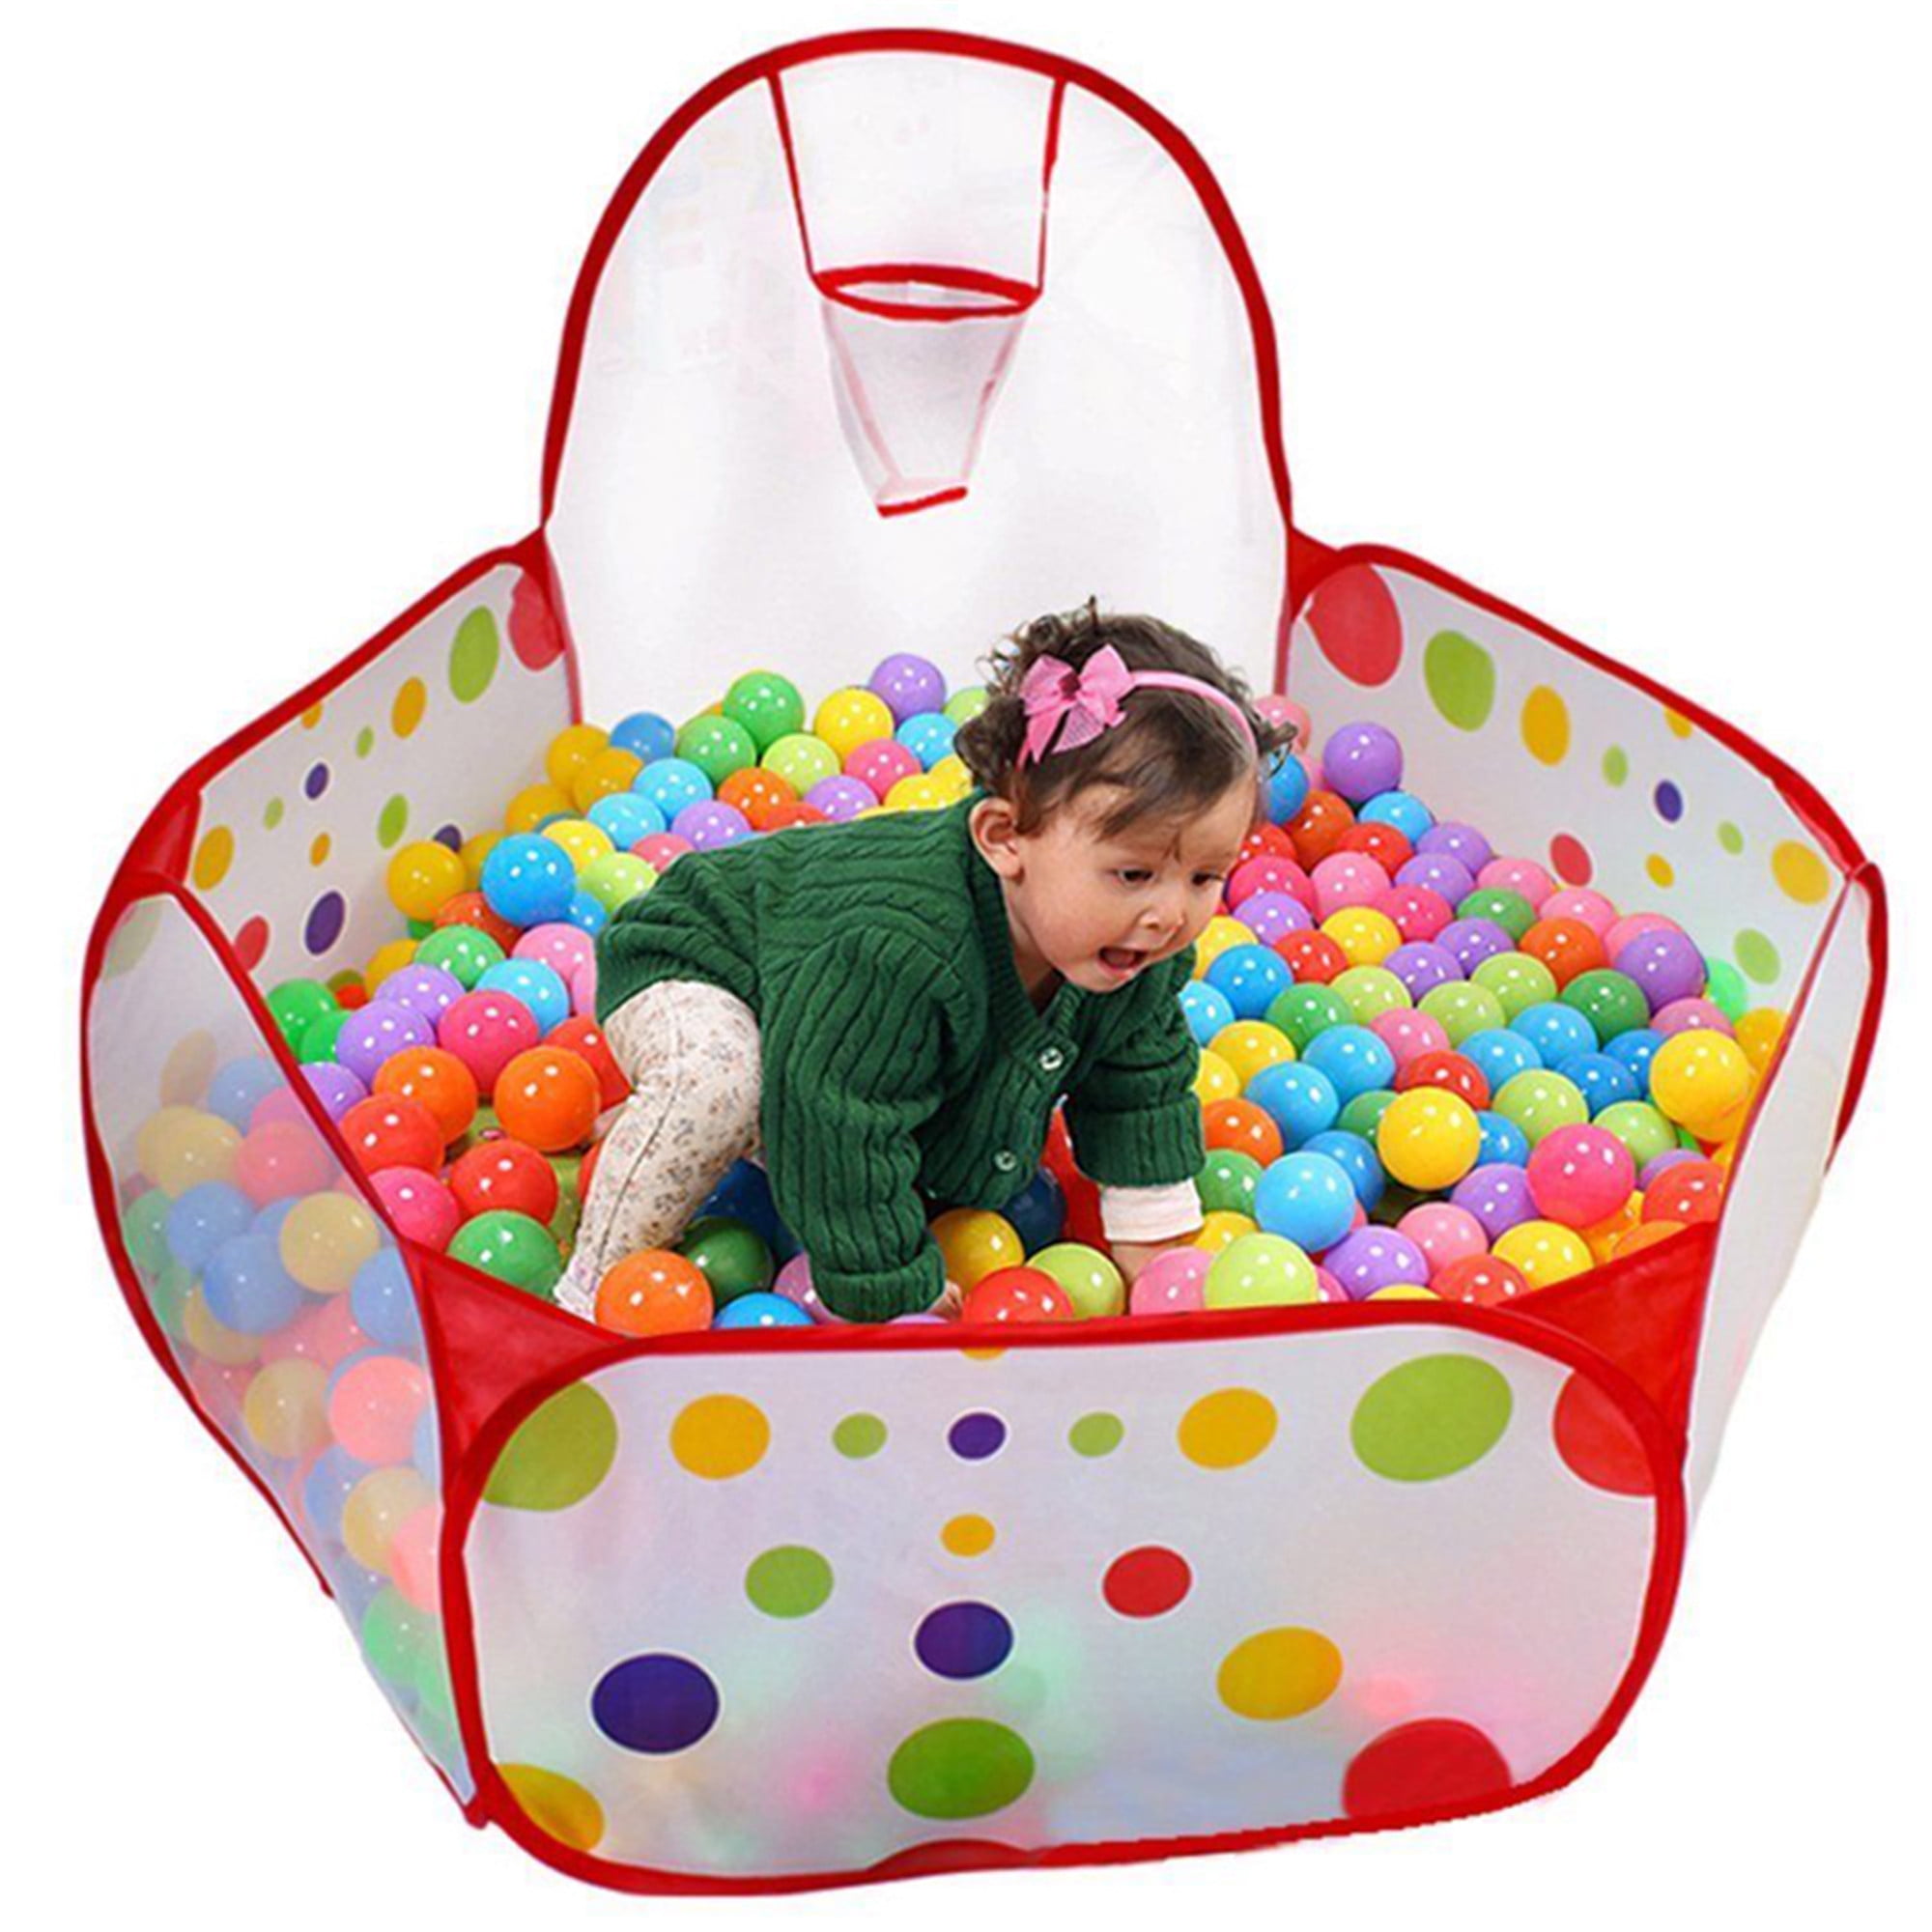 Kids Children Portable Ball Pit Pool Play Tent for Baby Indoor Outdoor Game Toys 